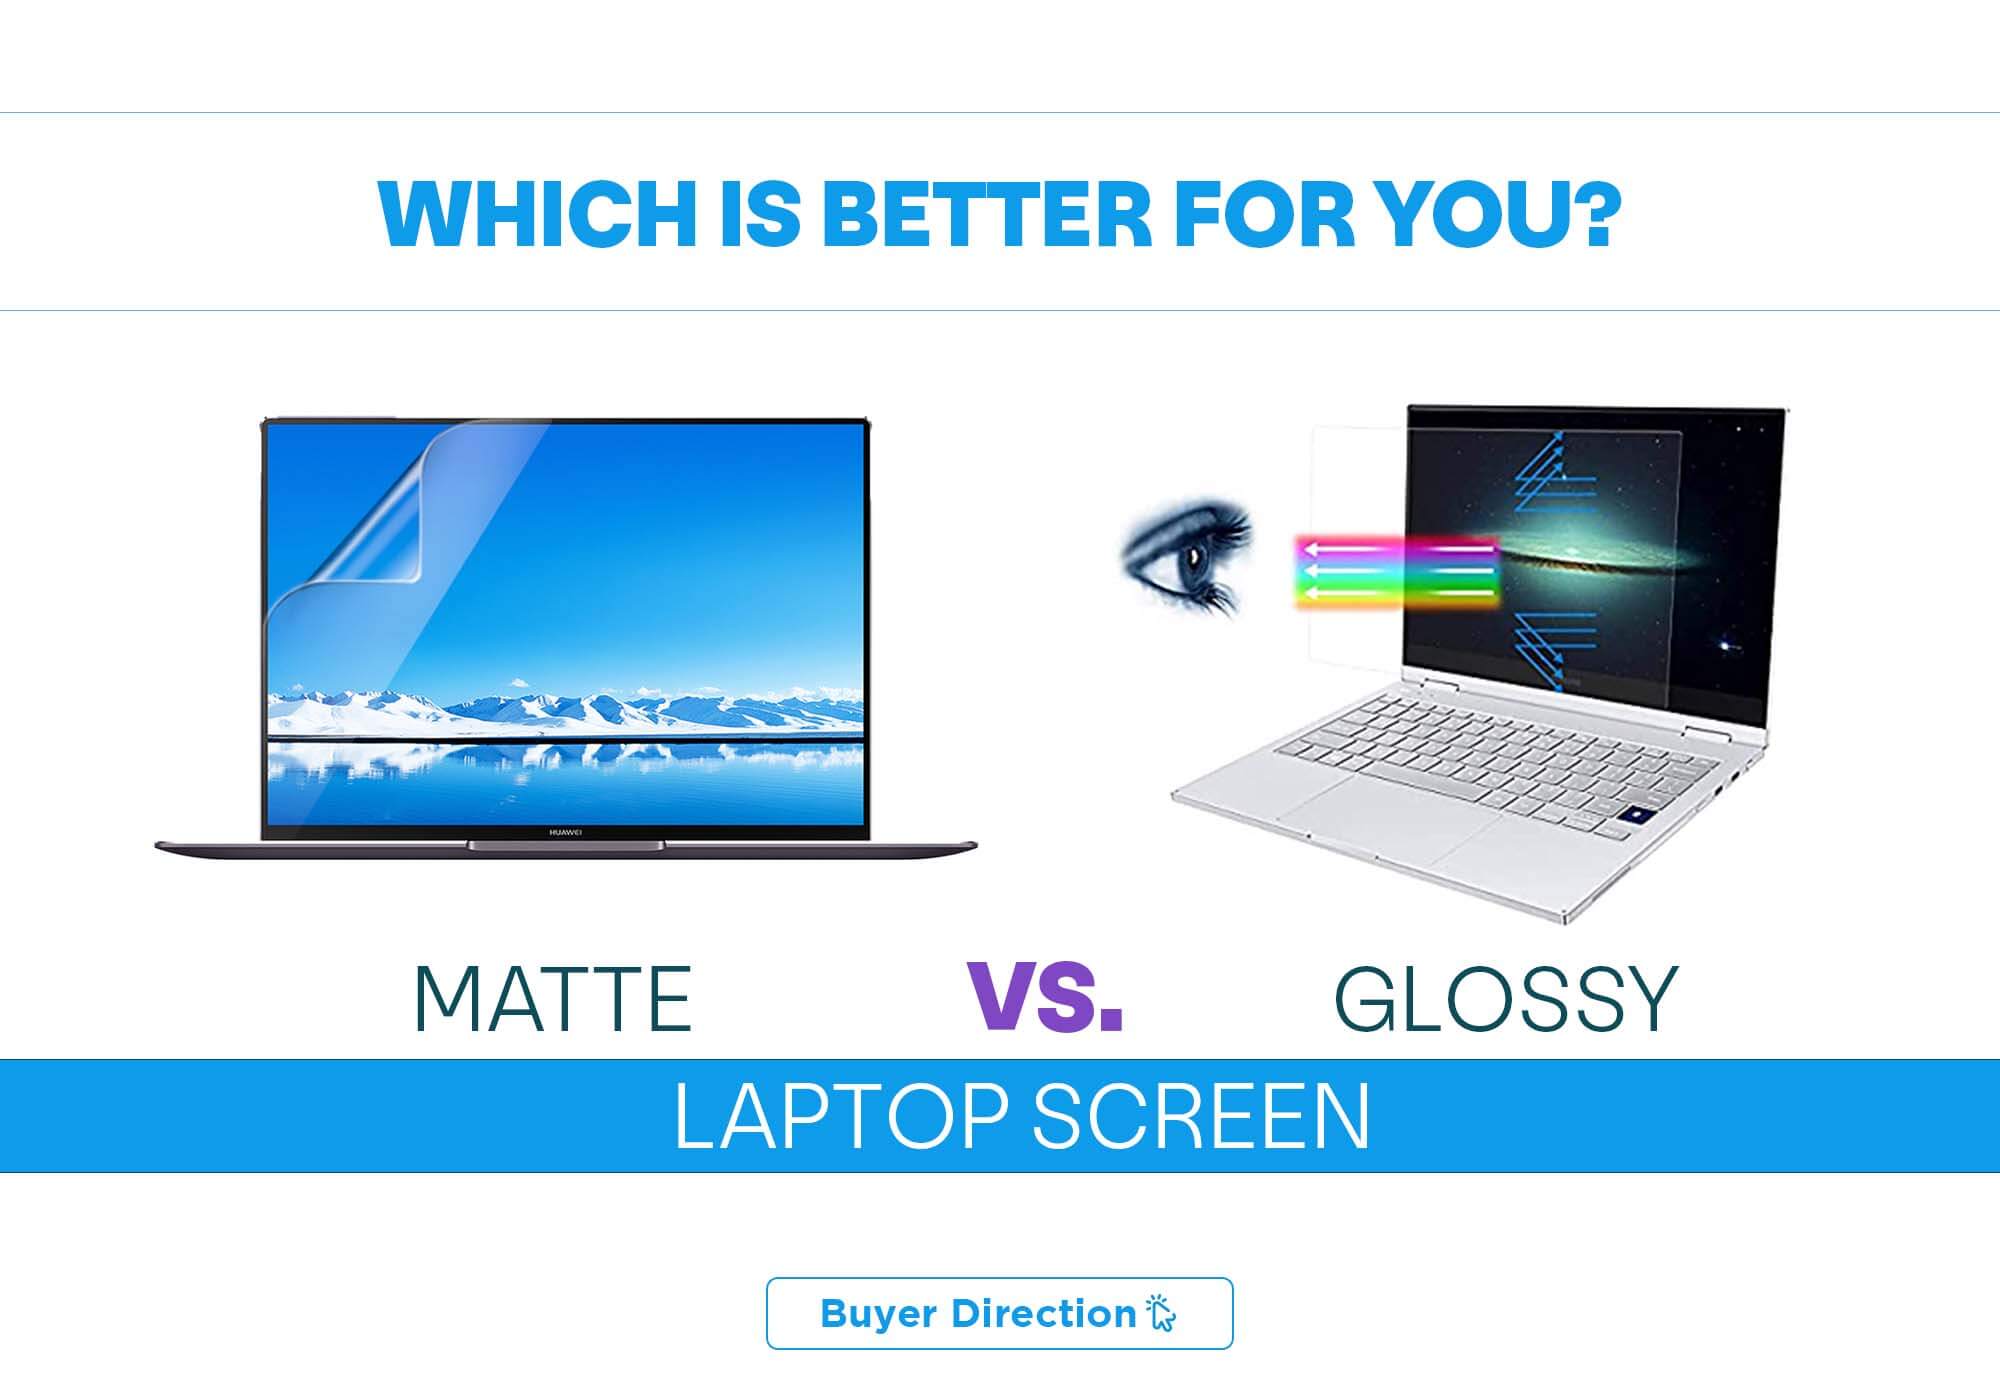 Matte vs. Glossy Laptop Screen: Which is better for you?